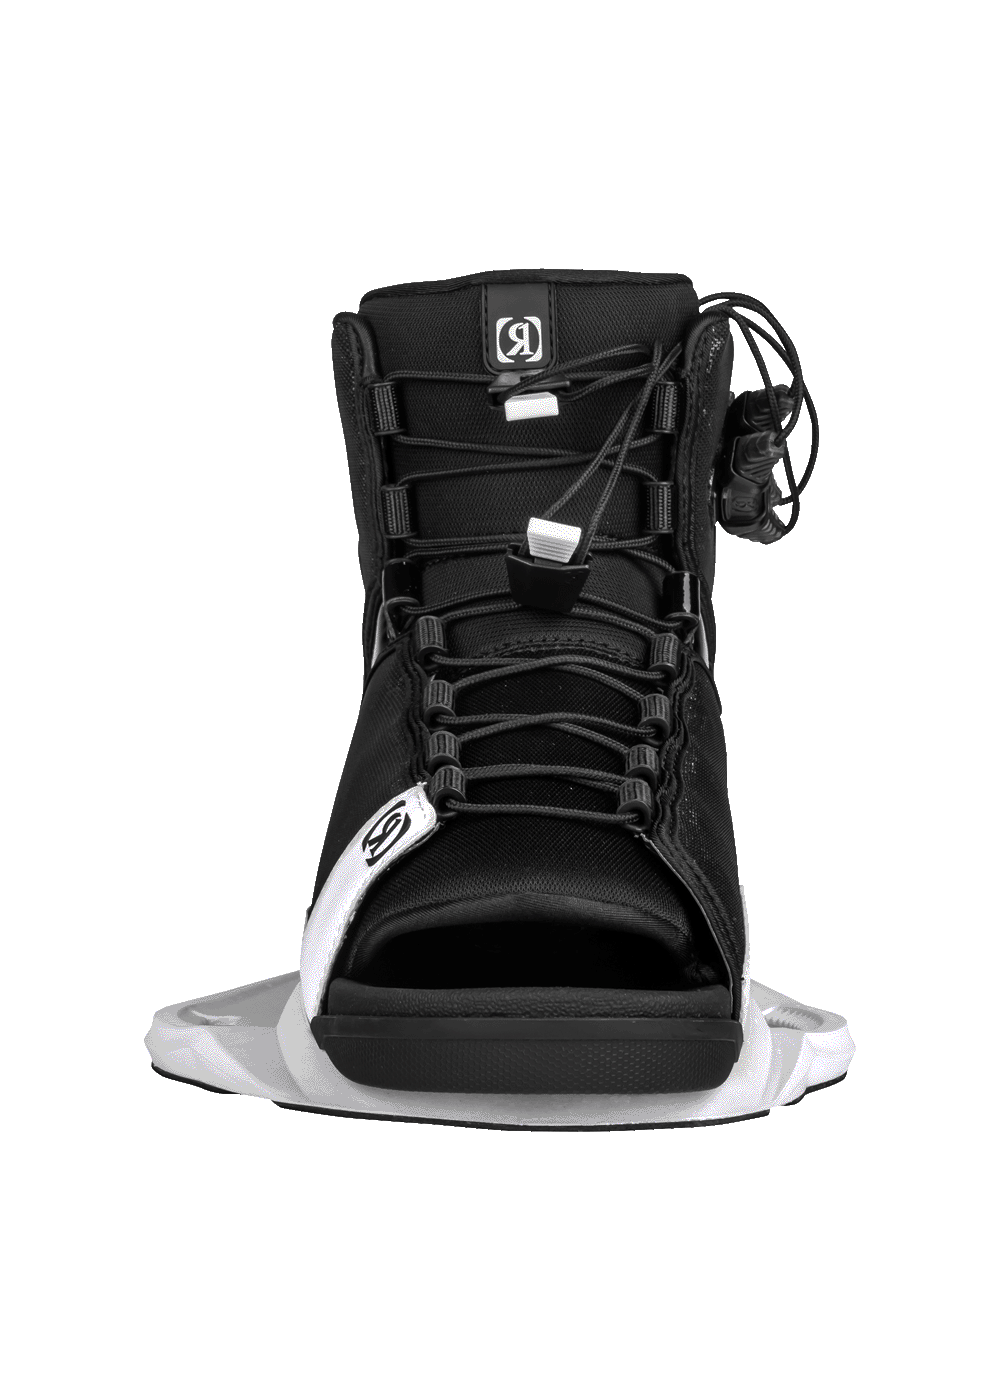 RONIX HALO BOOTS